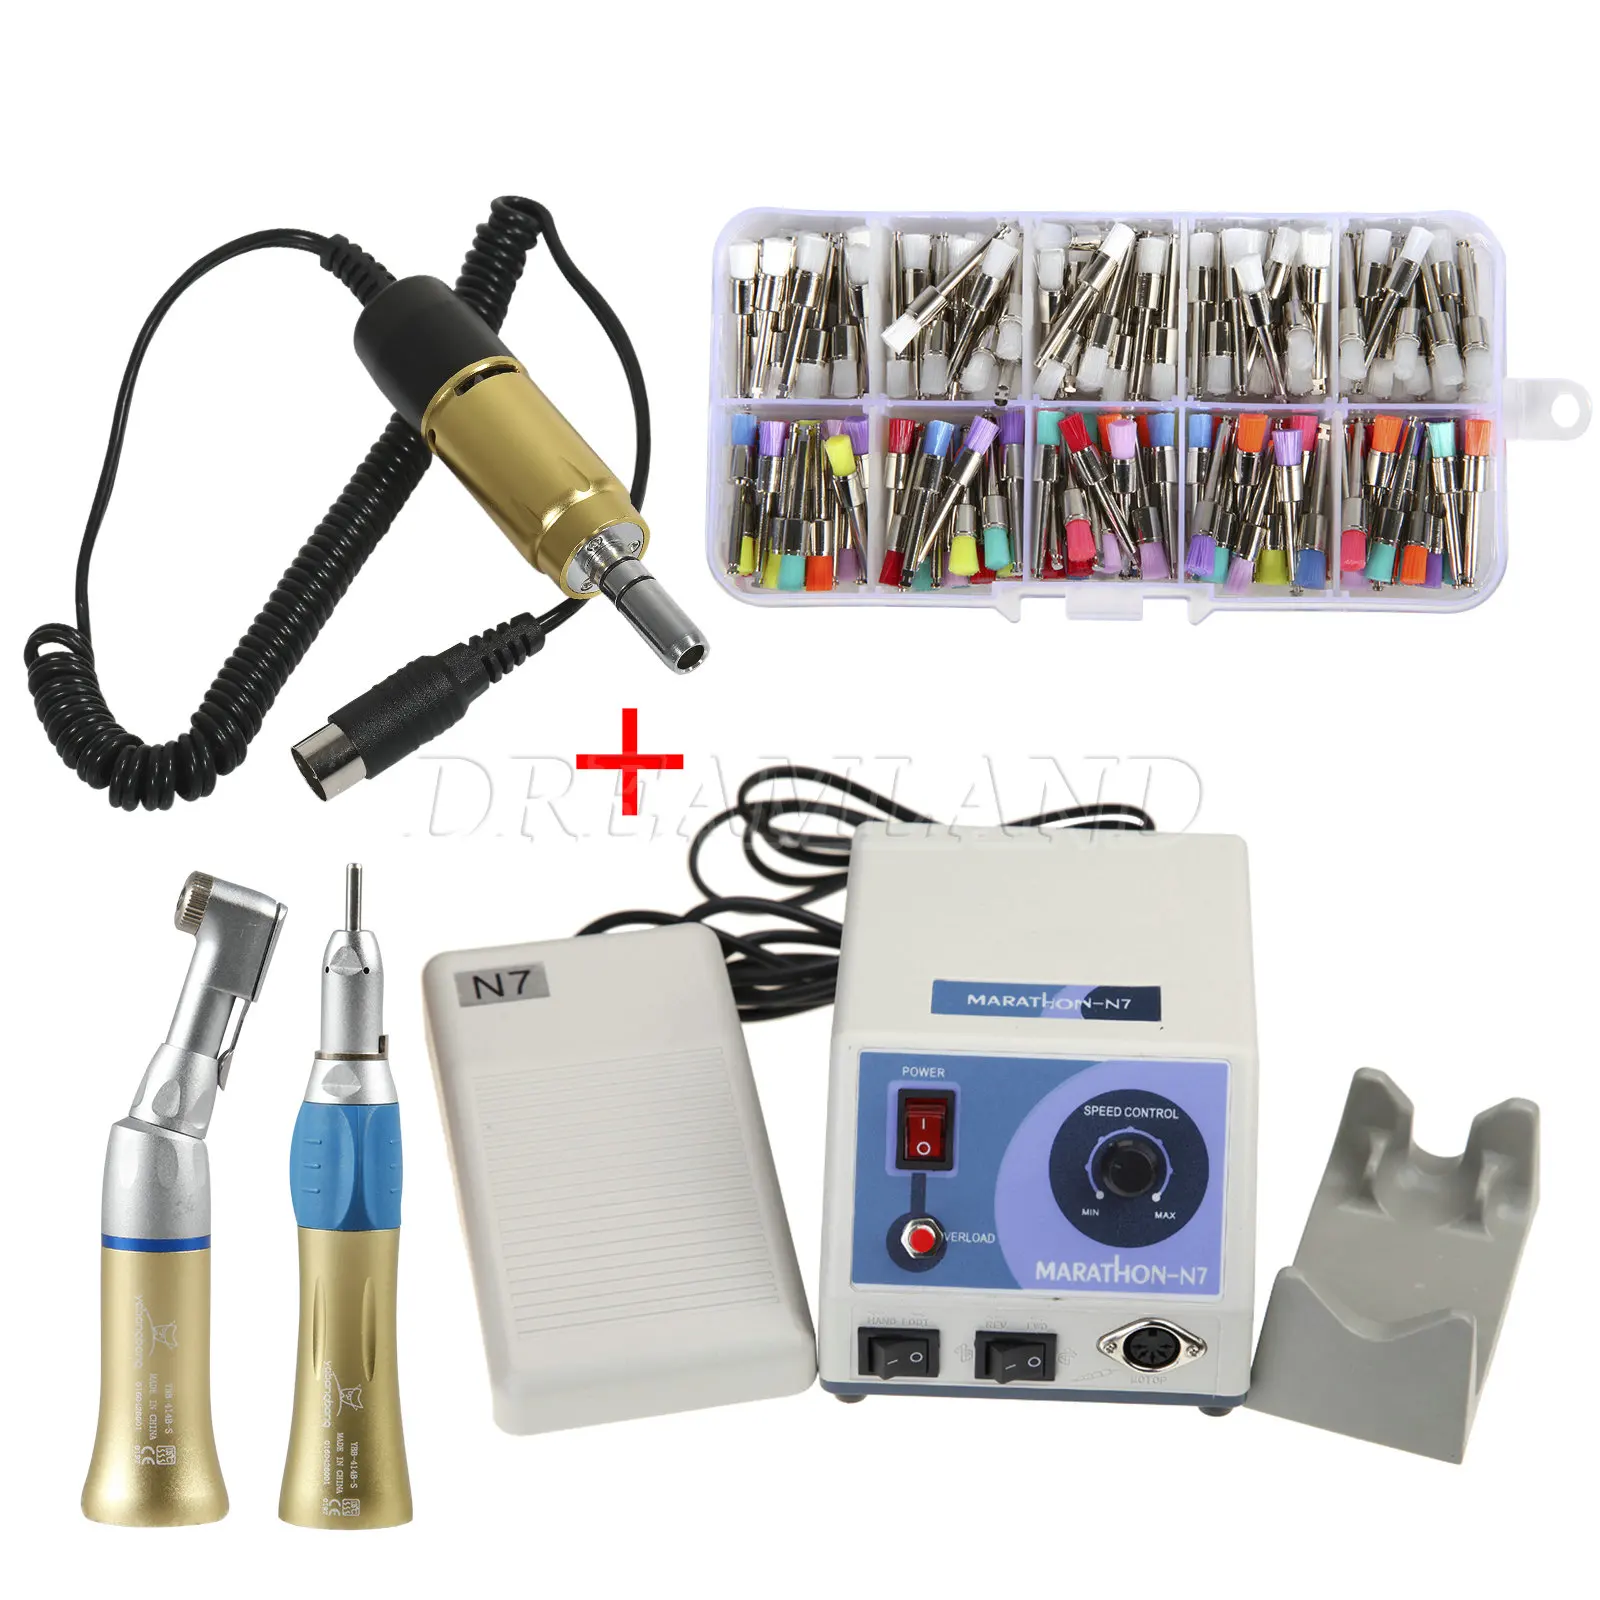 

Dental Lab Marathon Micromotor N7 Polish Machine+E-Type Electric Motor+Straight/Contra Handpiece/Gold+Polish Brushes/Cups Mixed